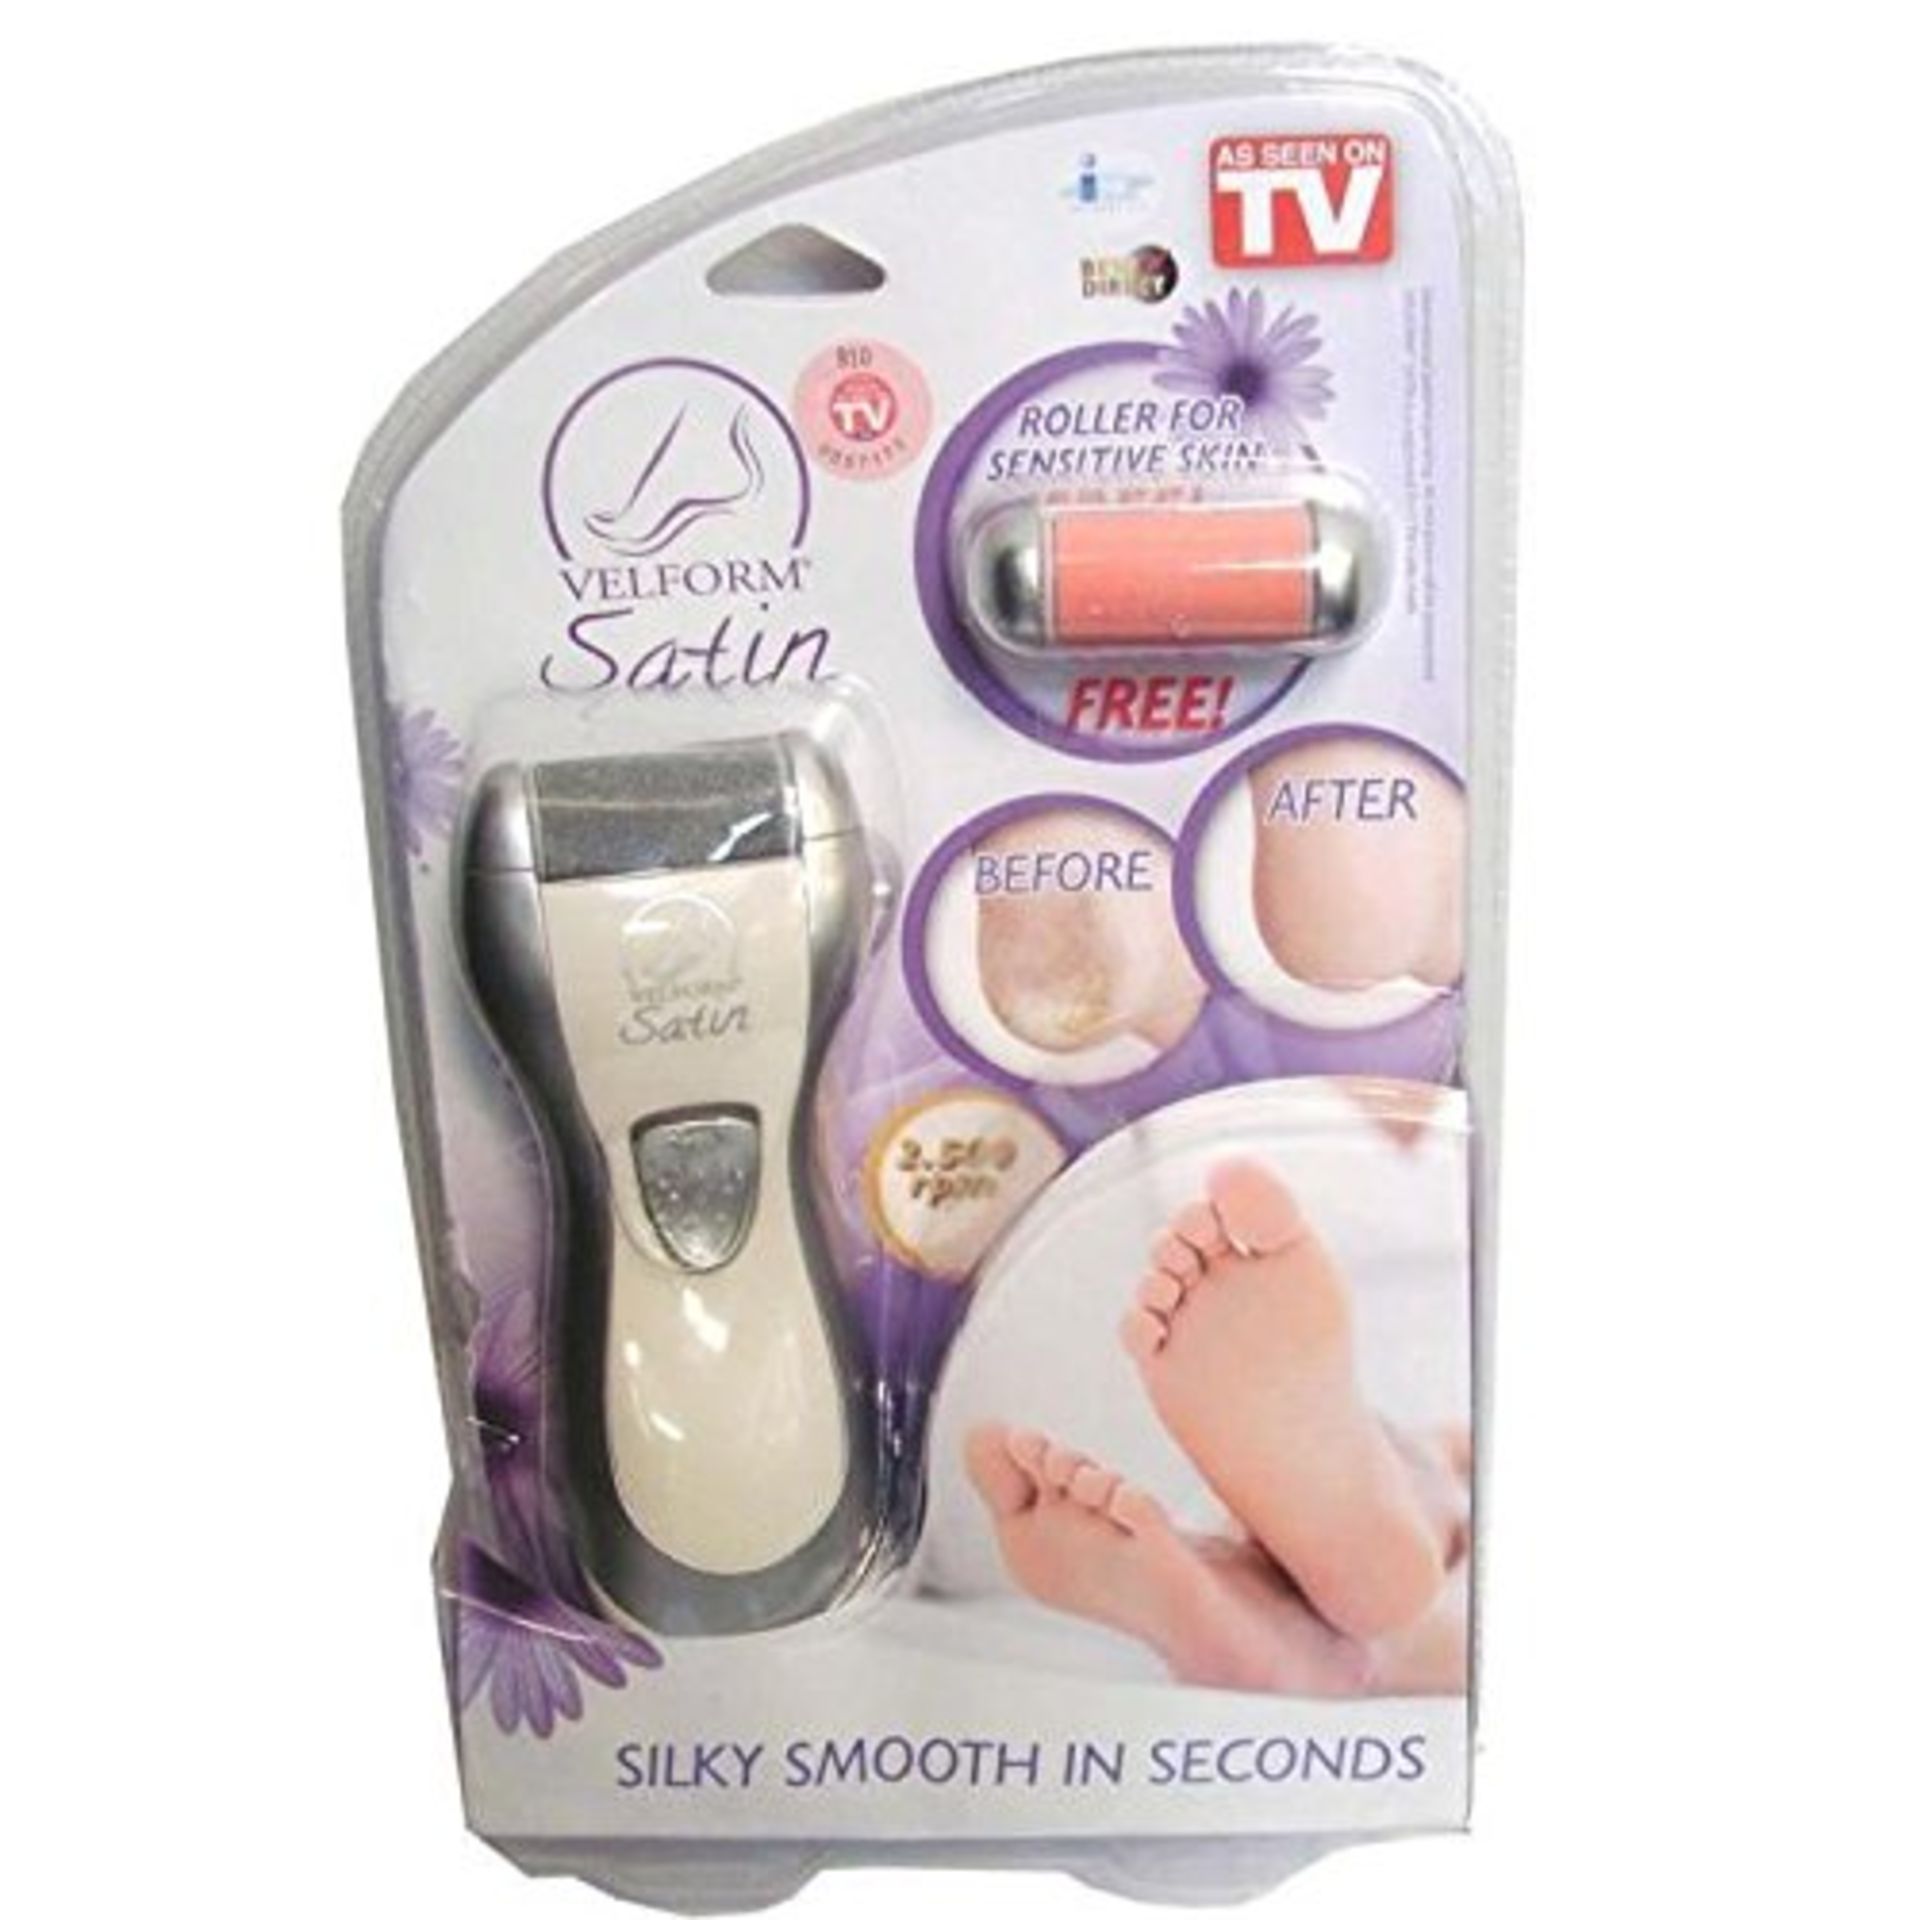 + VAT Brand New Velform Satin Battery Operated Foot File Callous/Rough Skin Remover-Rotates At